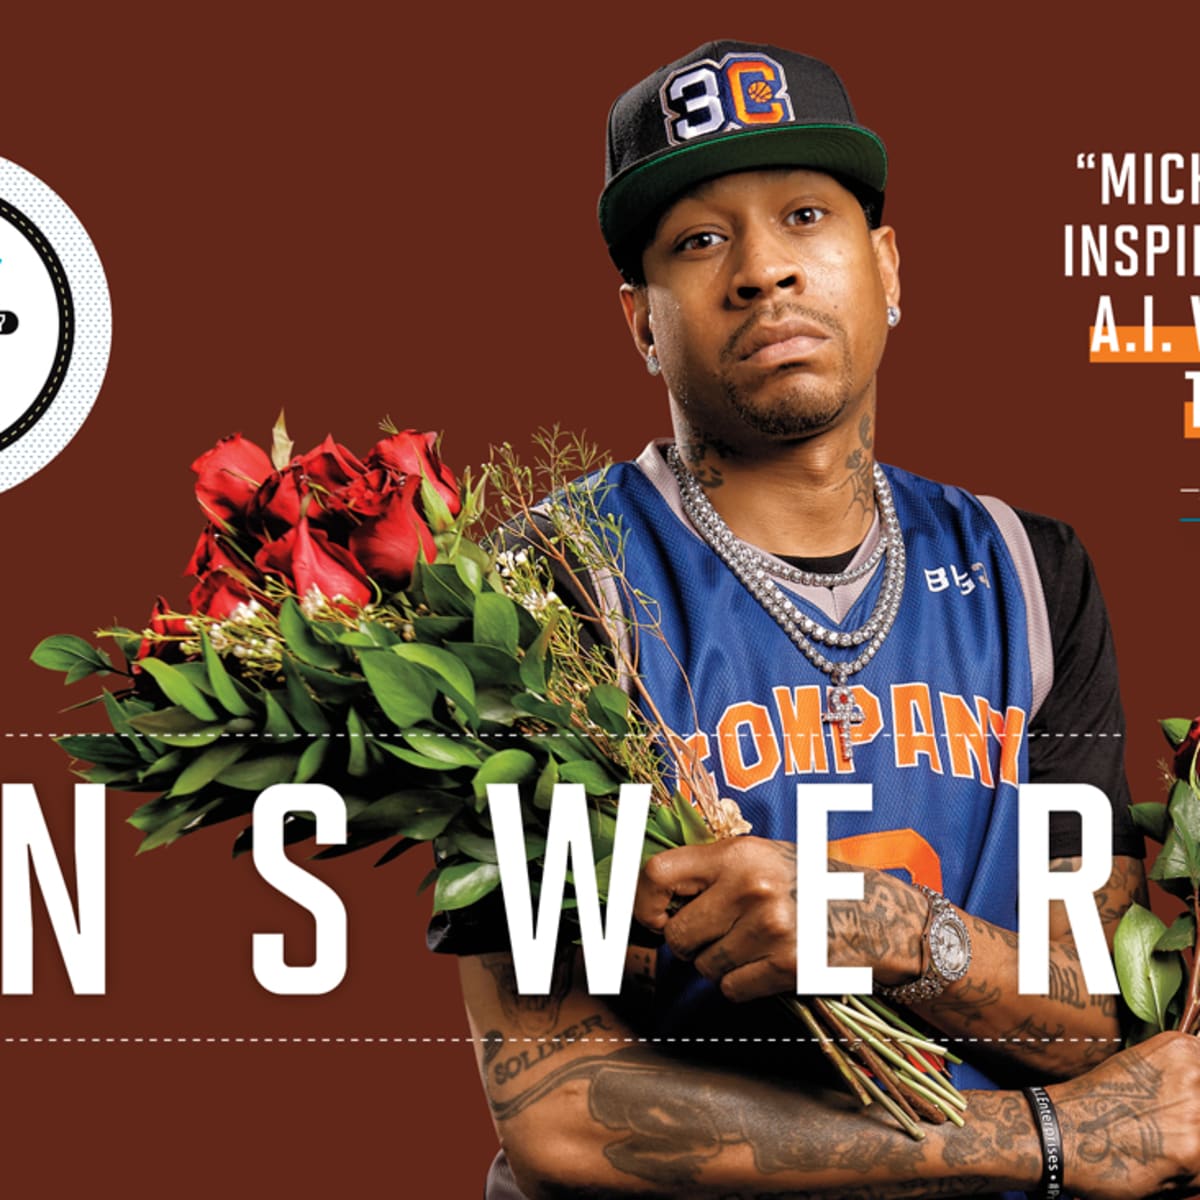 Allen Iverson, Biography, Stats, & Facts